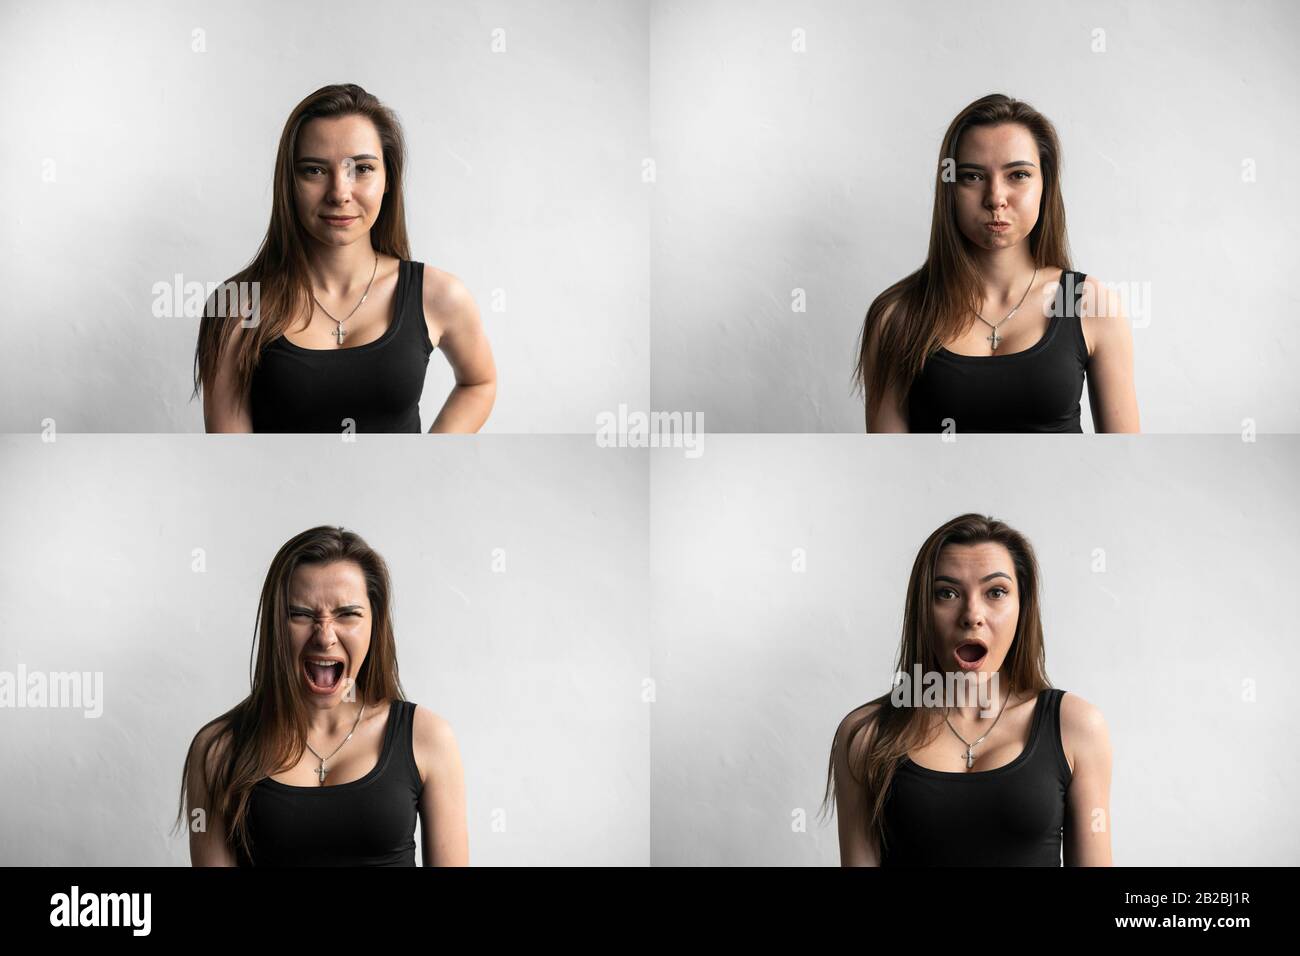 Set of young woman's portraits with different emotions. Young beautiful cute girl showing different emotions. Laughing, smiling, anger, suspicion, fea Stock Photo